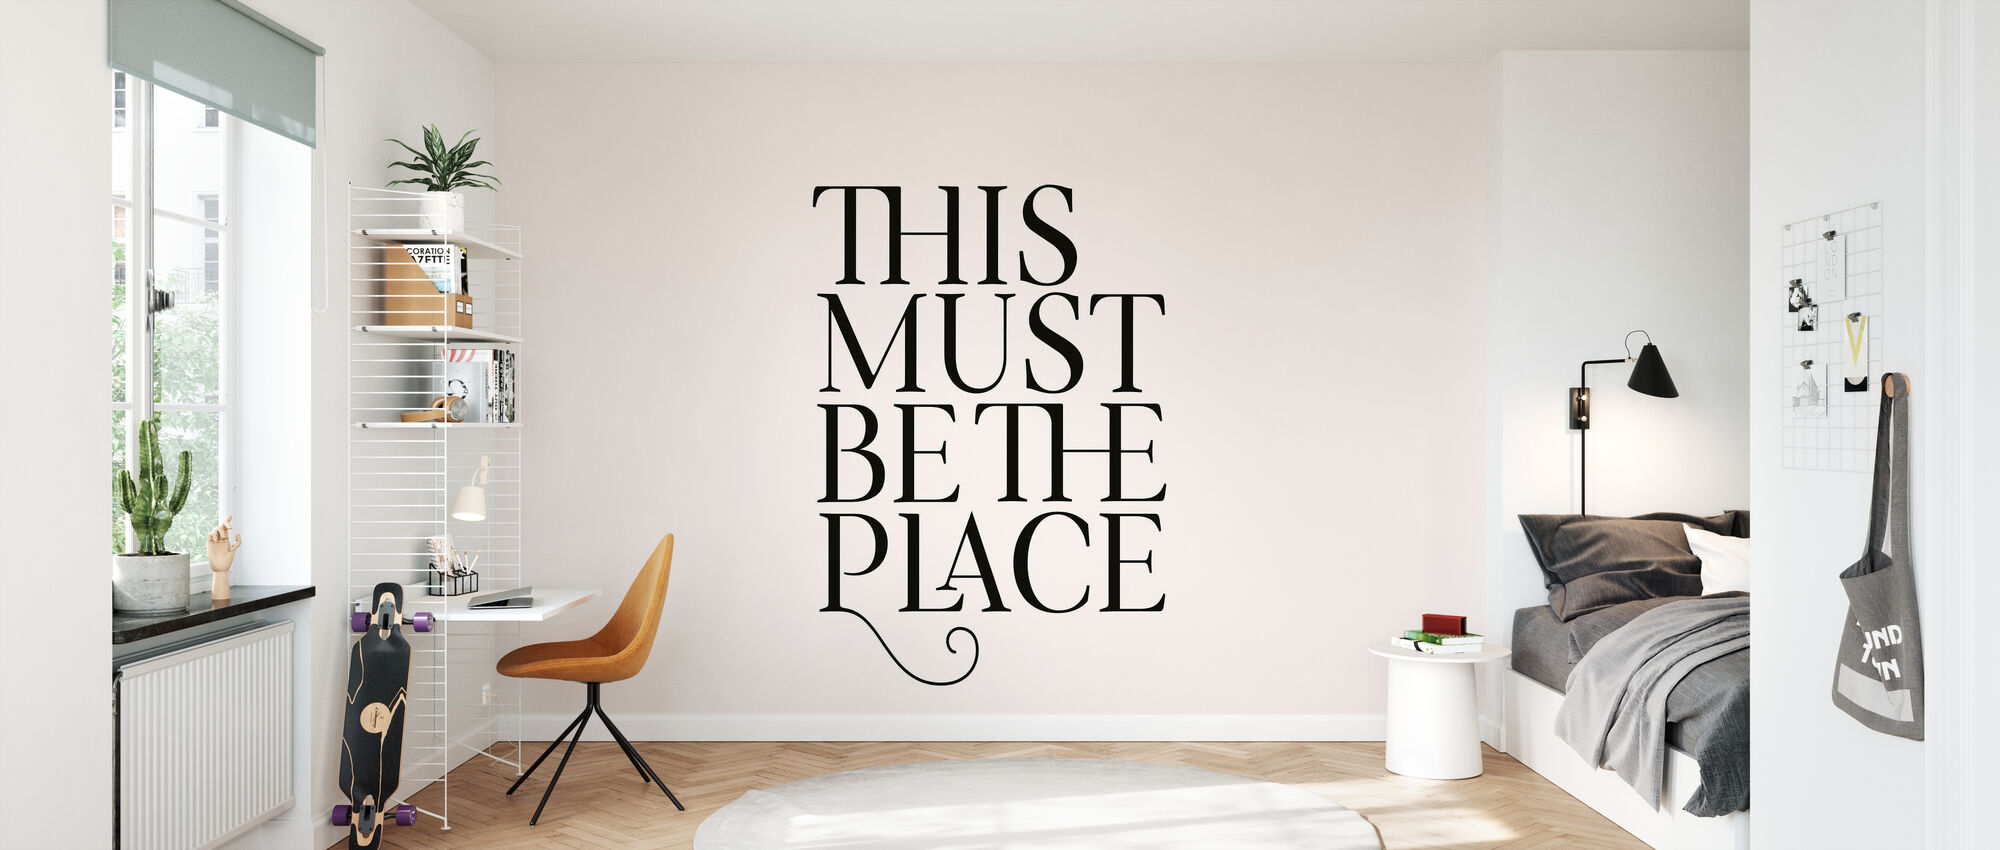 This Must Be the Place – lovely wall mural – Photowall